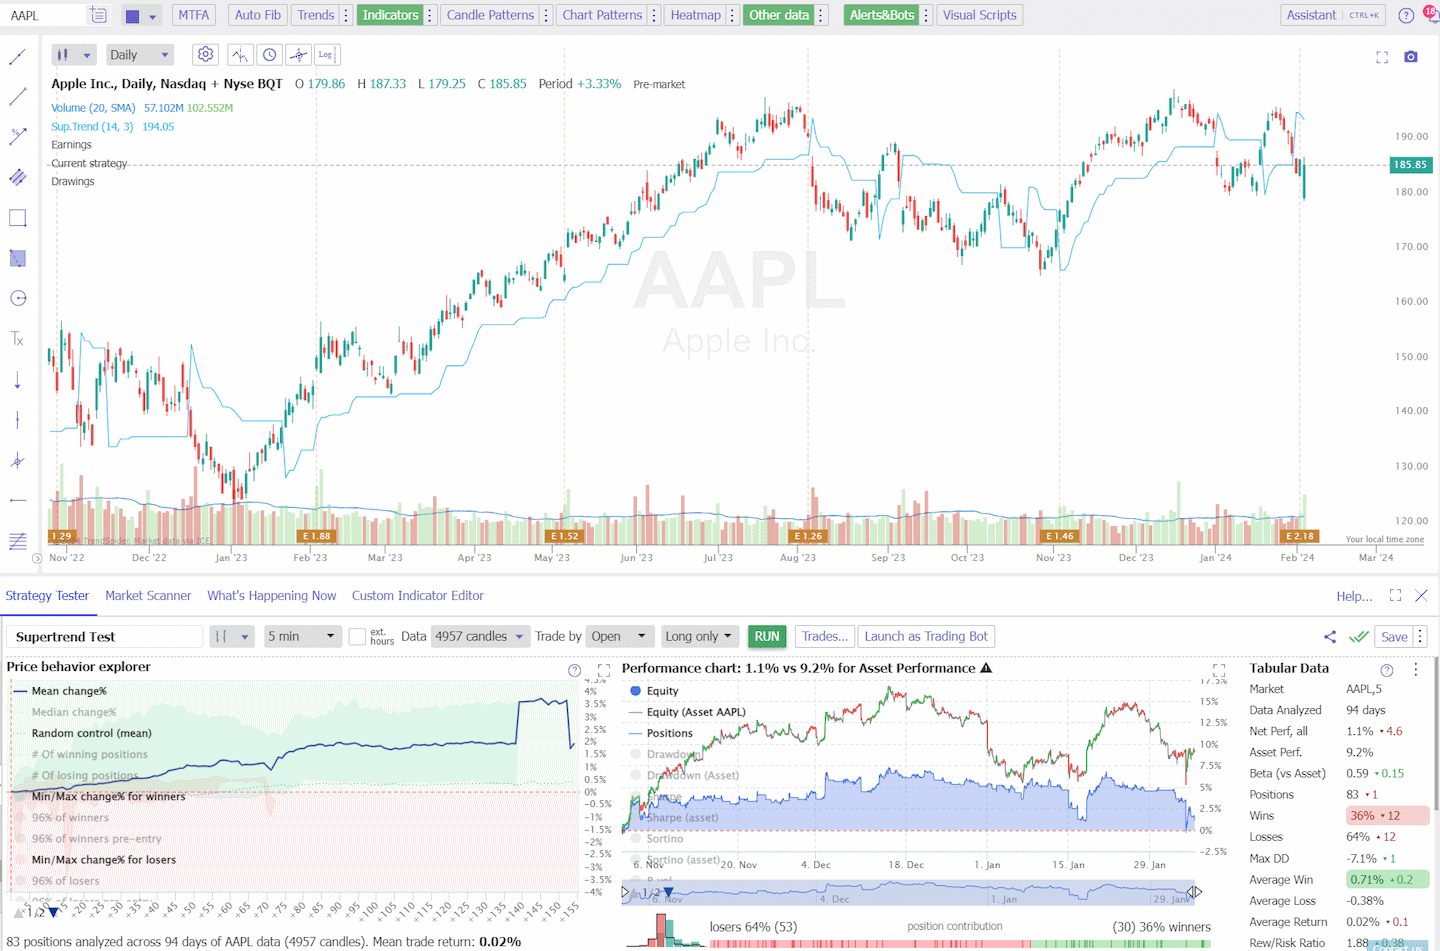 Supertrend Day Trading Backtesting: 5-Minute Chart Results Apple Inc. AAPL.